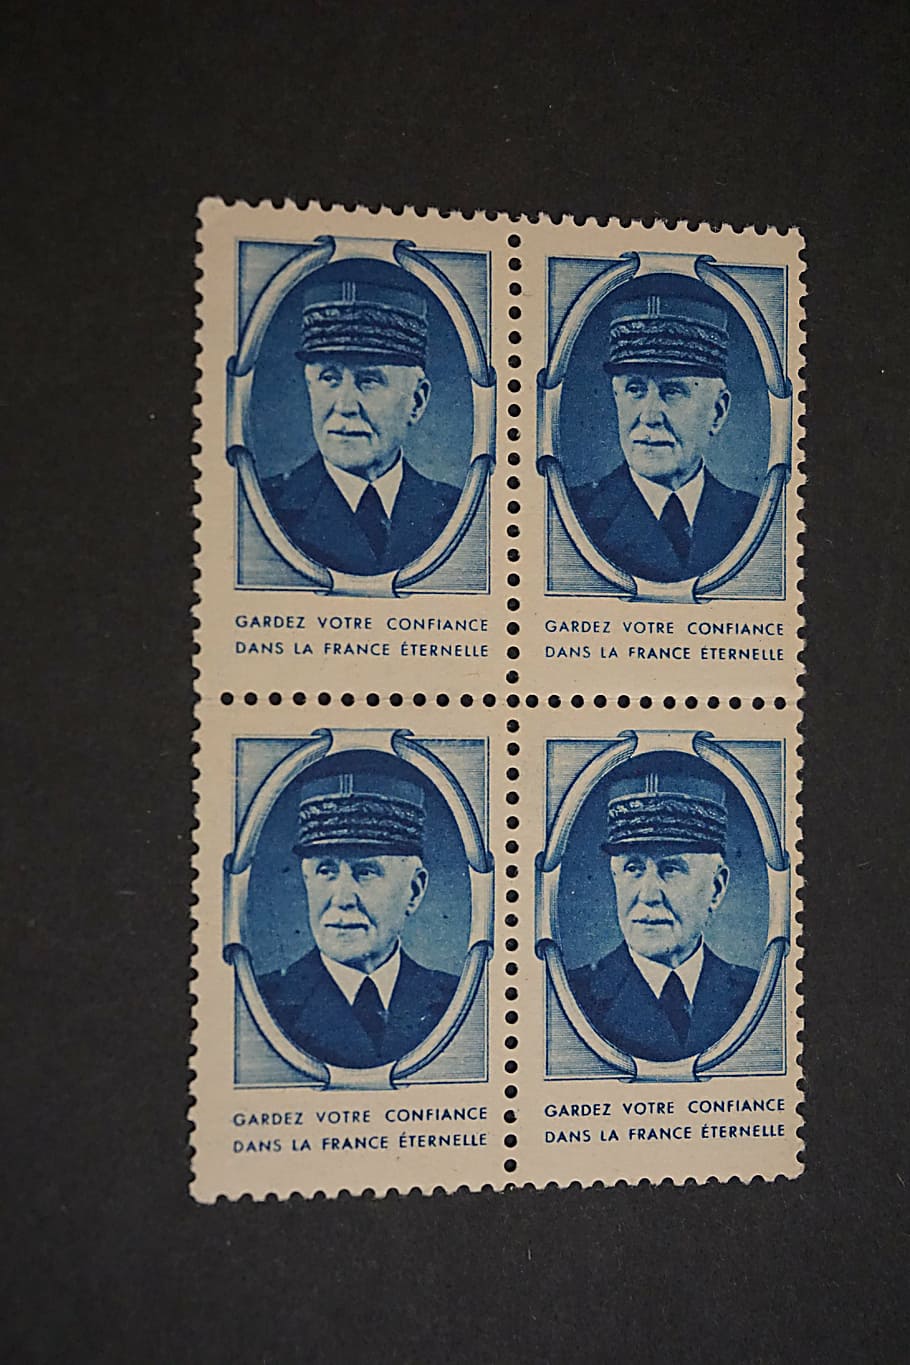 philately, stamps, collection, character, historic character, stamp collection, french stamps, marshal petain, pétain, block